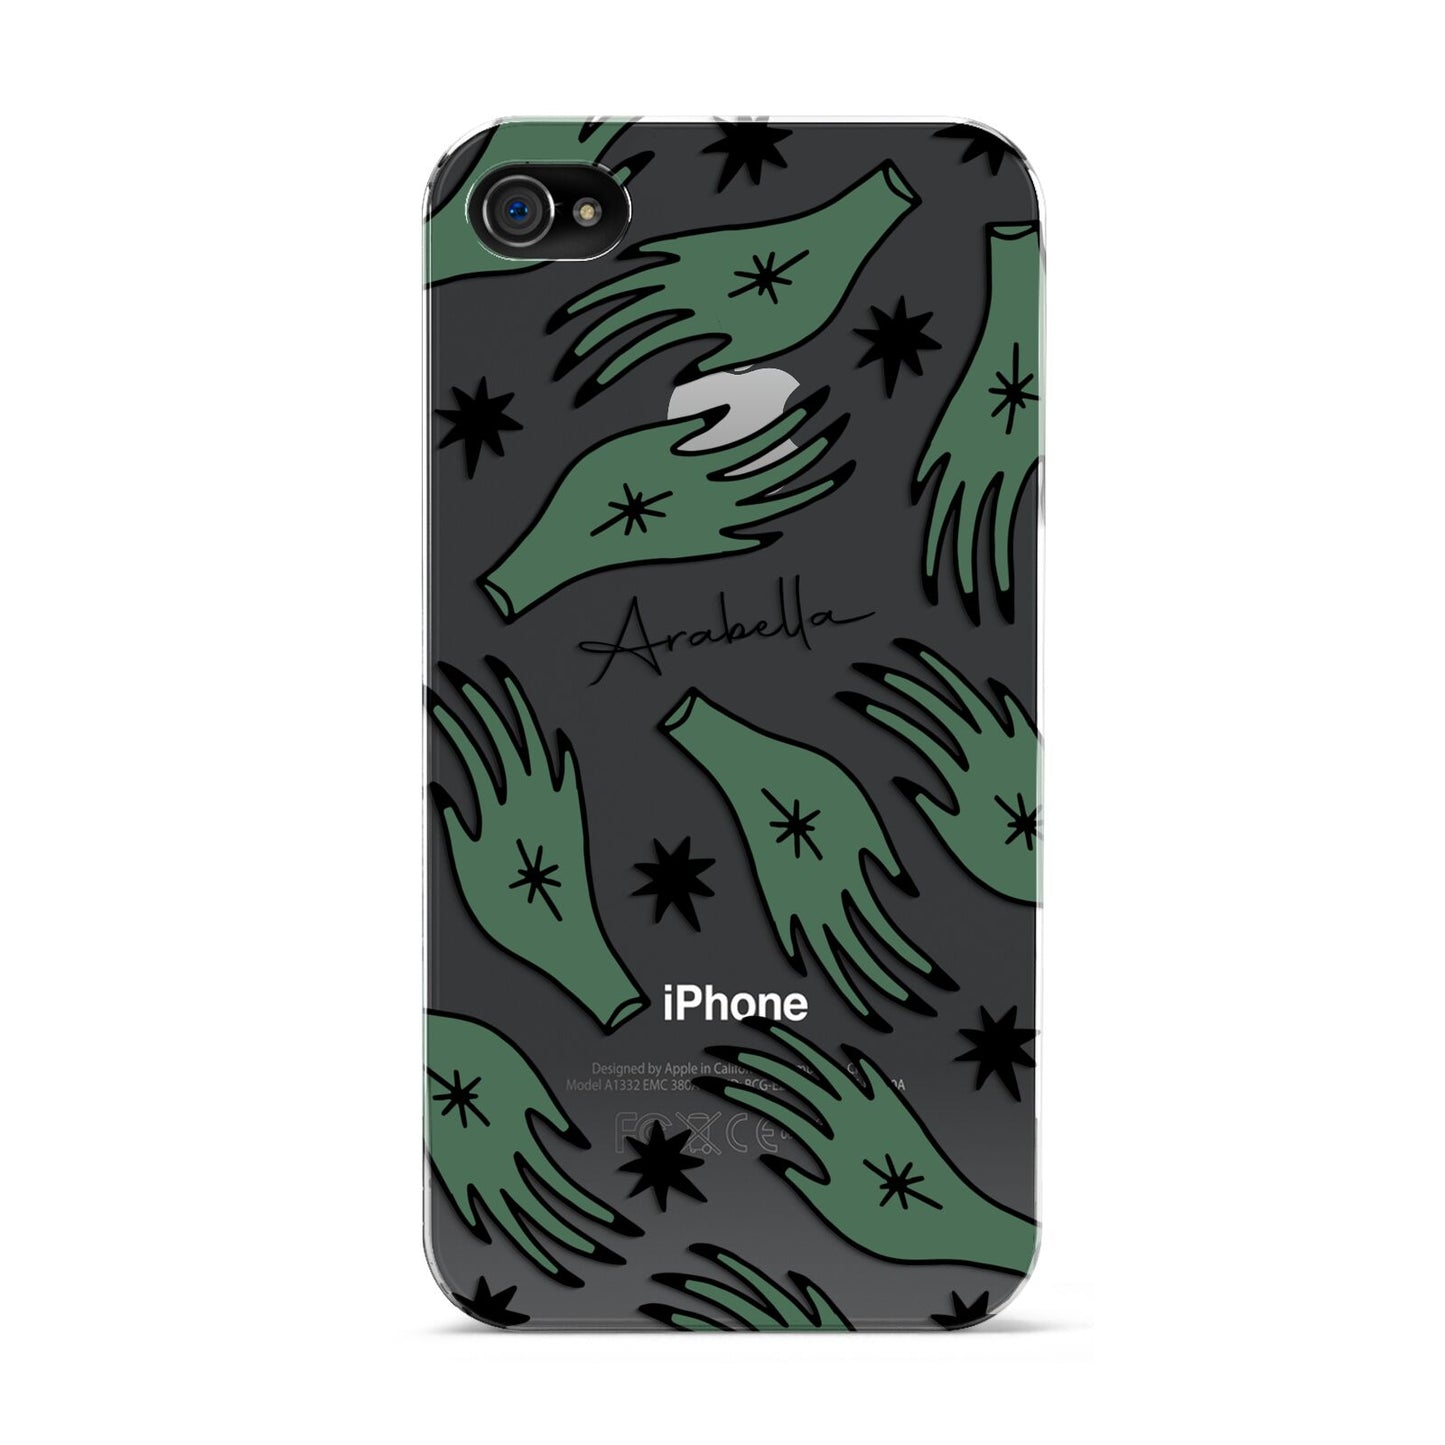 Green Star Hands Personalised Apple iPhone 4s Case